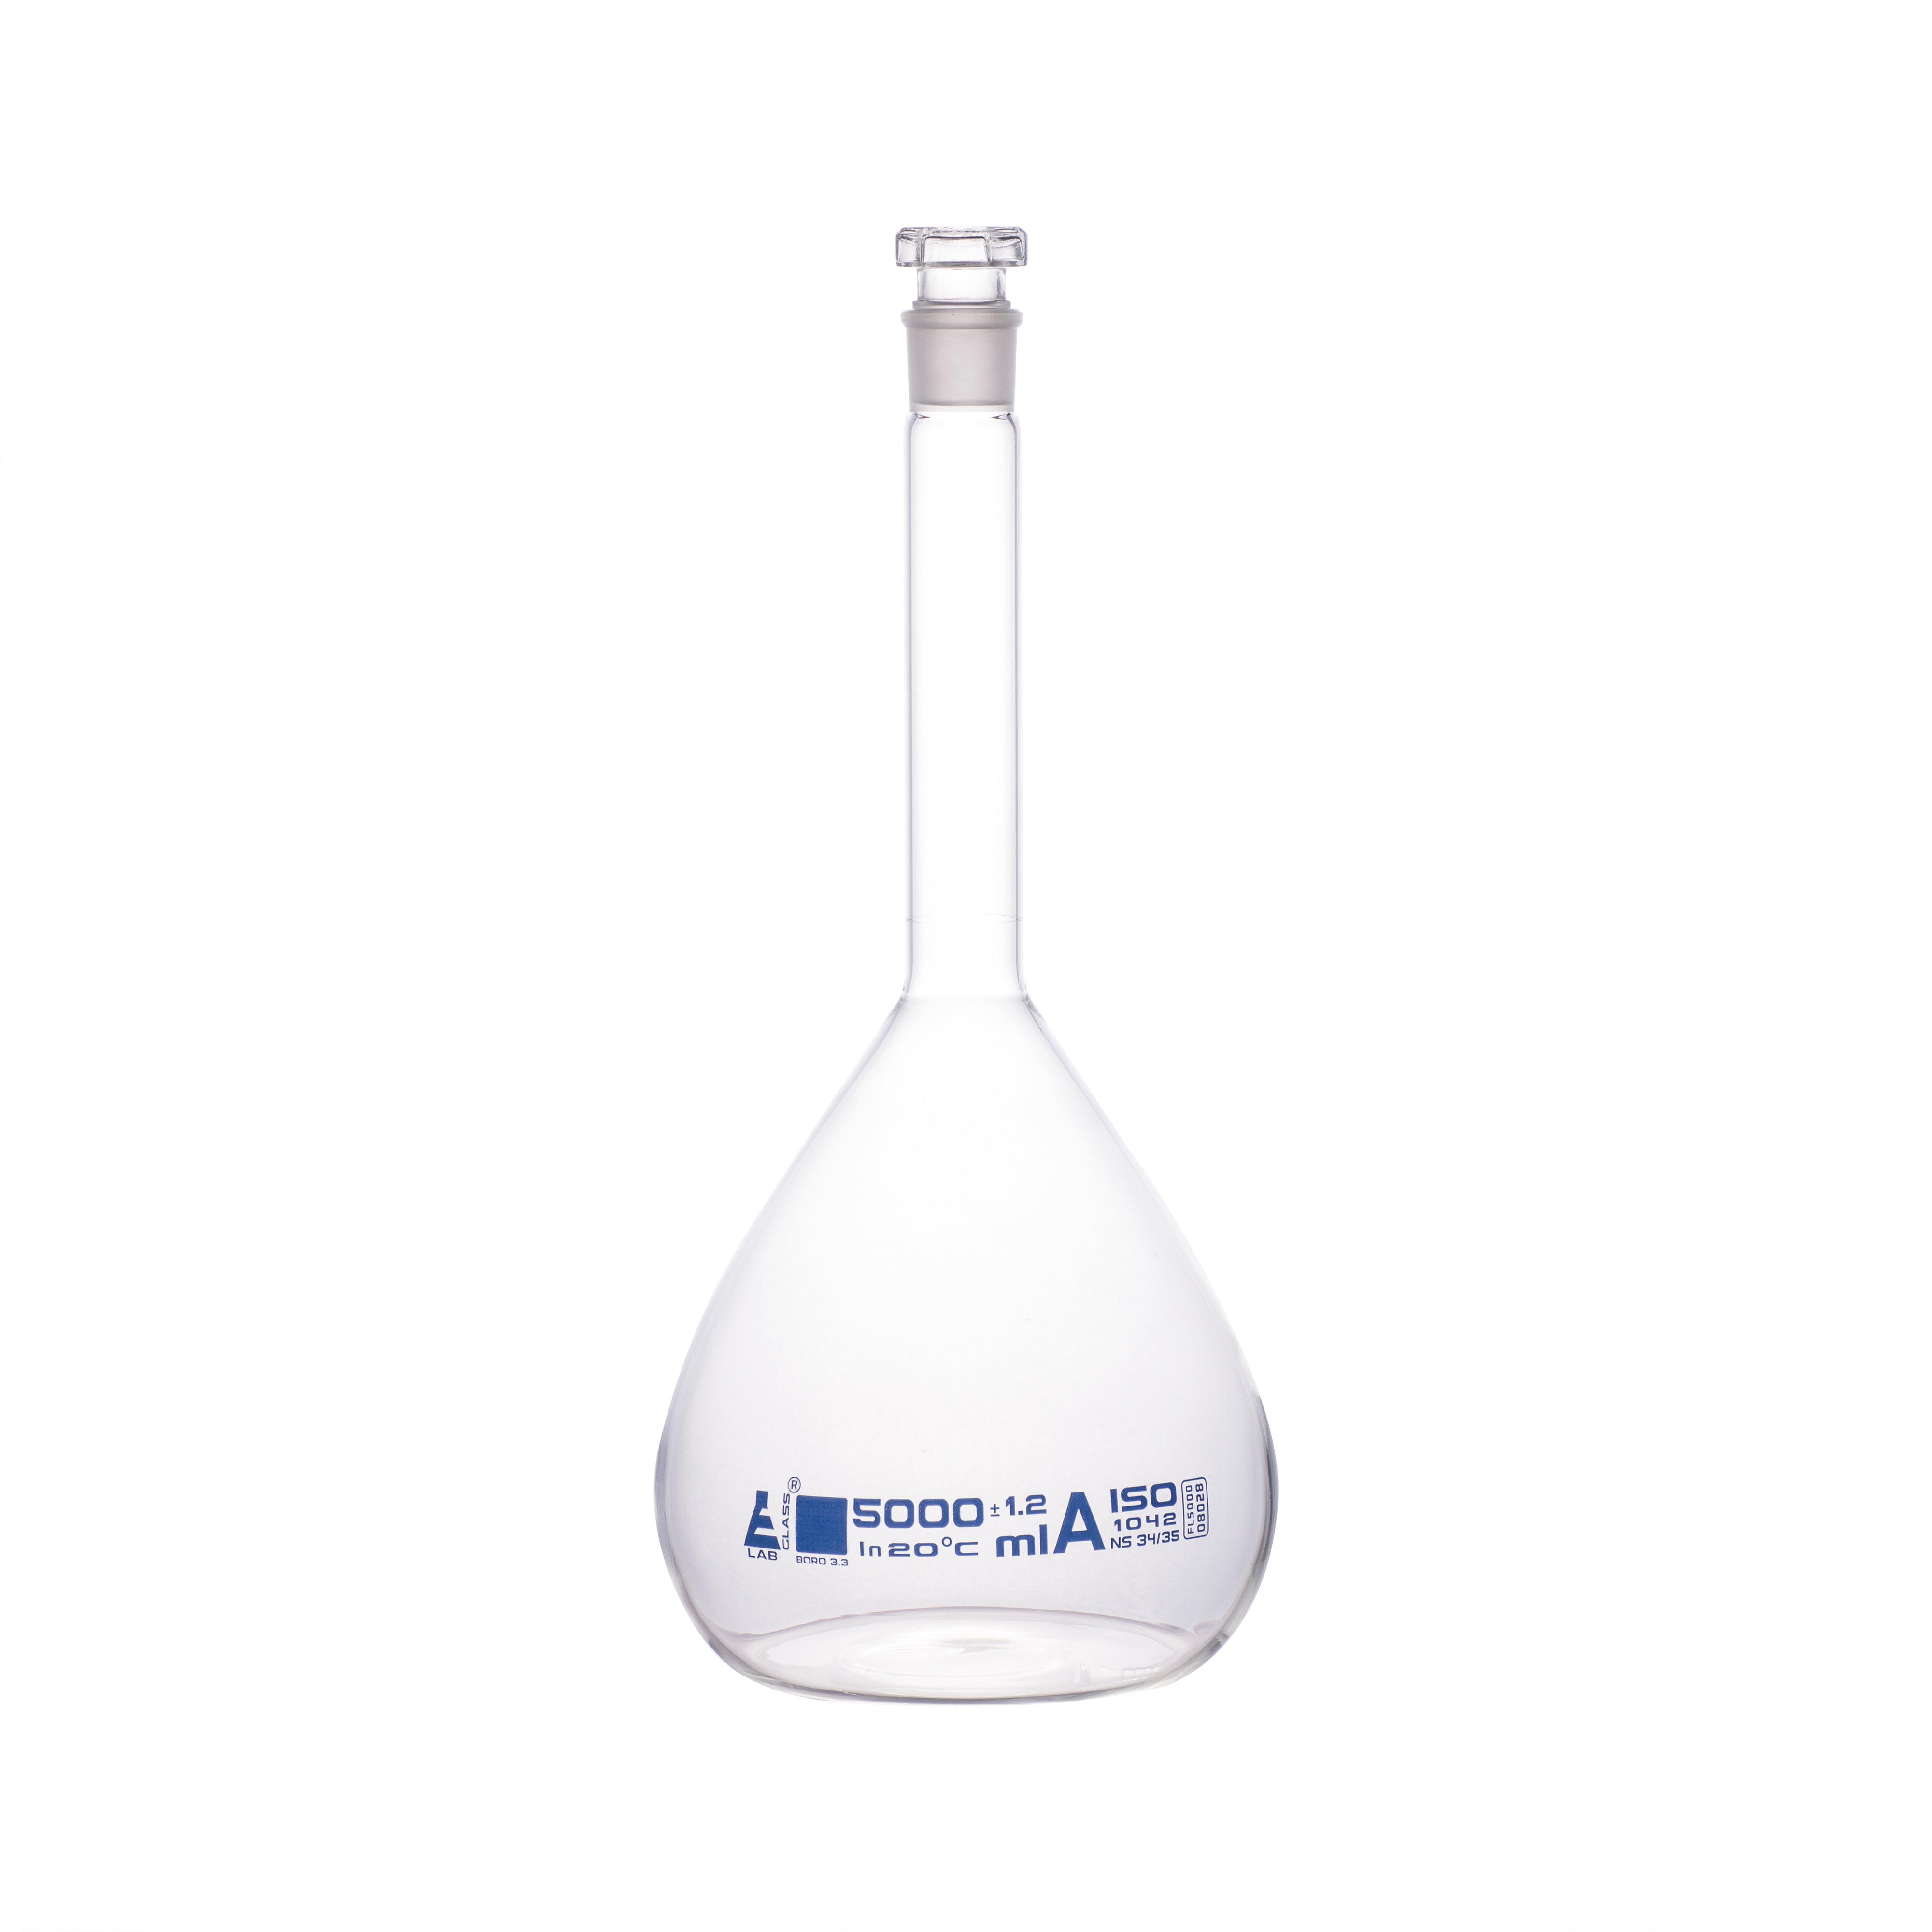 Borosilicate Volumetric Flask with Hollow Glass Stopper, 5000ml, Class A, Blue Print, Autoclavable